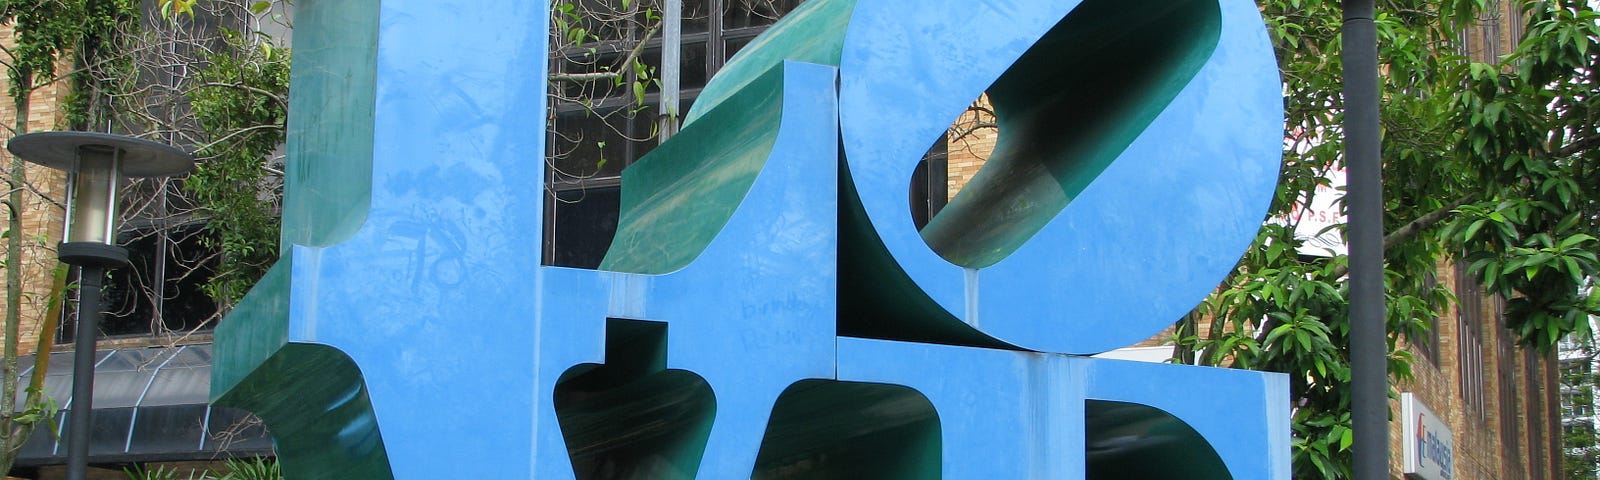 love, letters in blue, Singapore